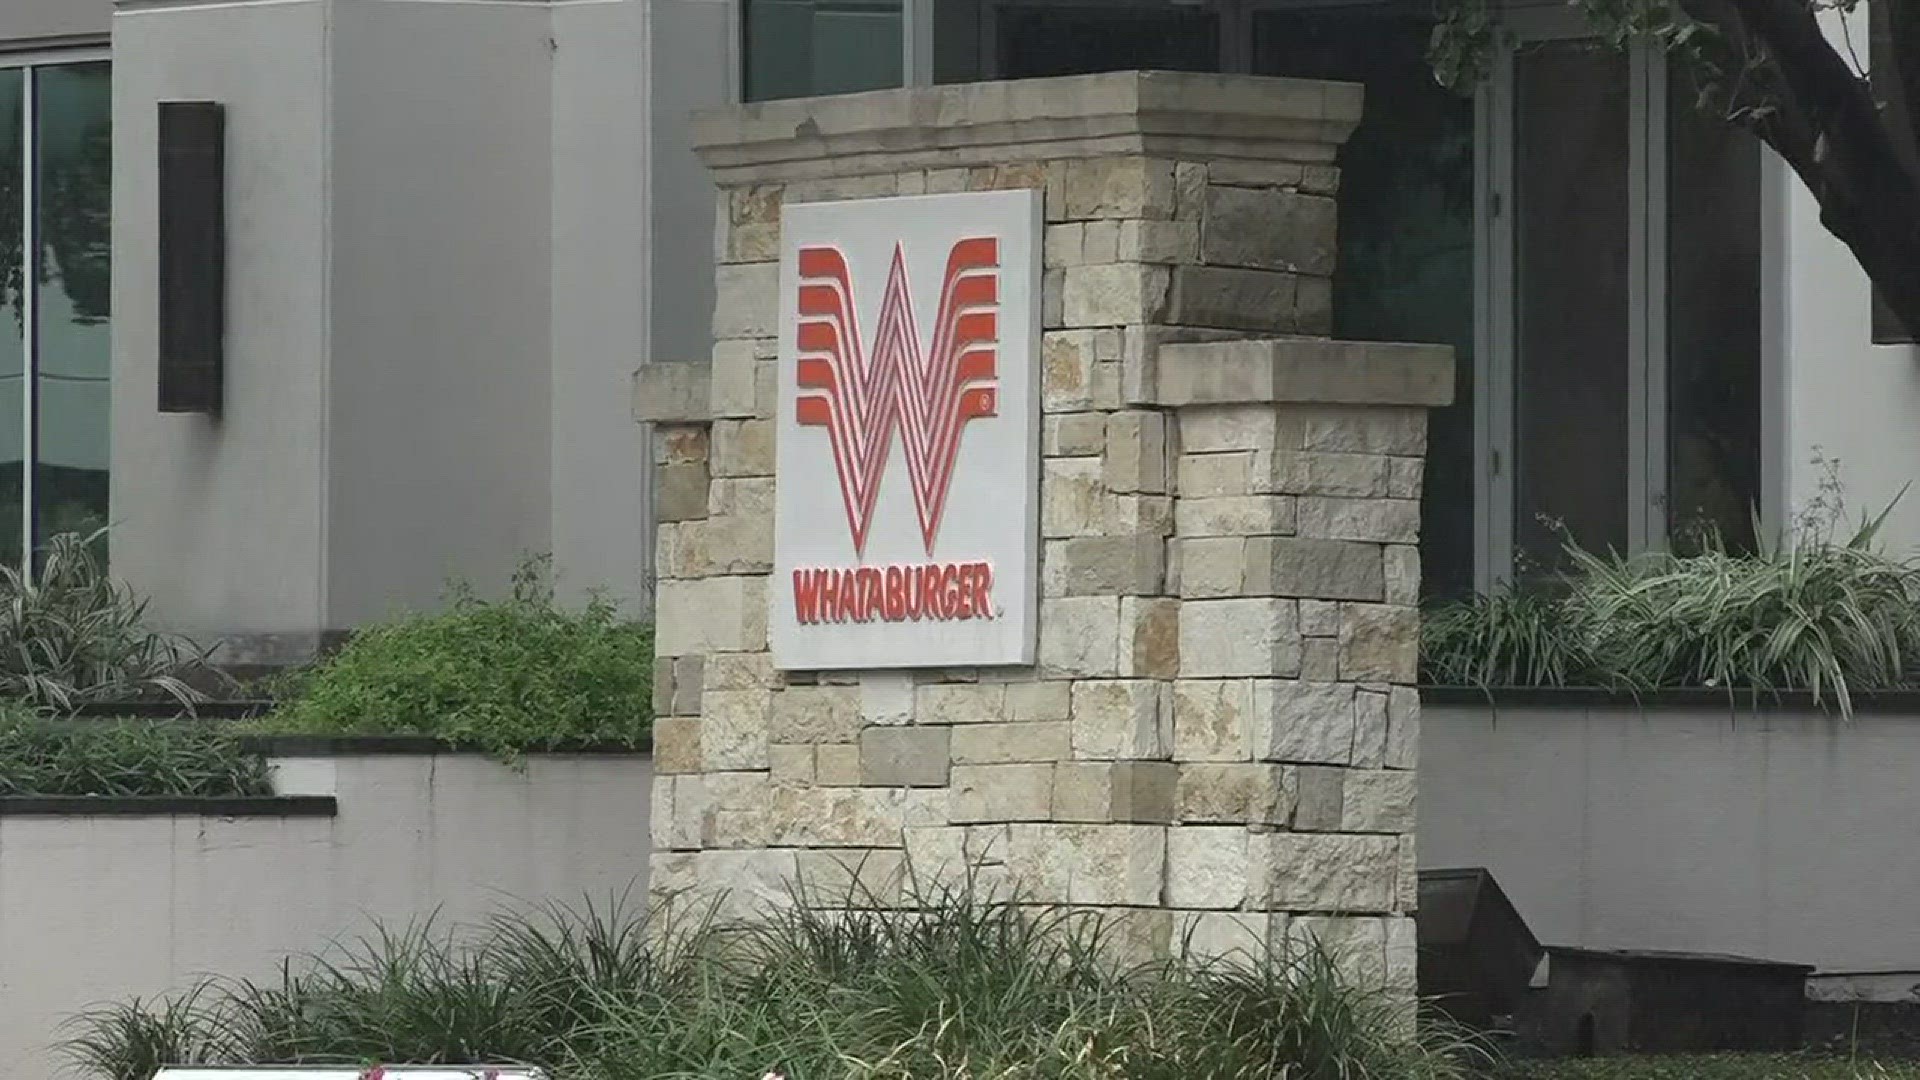 A lawsuit alleges Whataburger violated federal law by retaliating against a manager because she refused to participate in a directive to hire only white applicants.